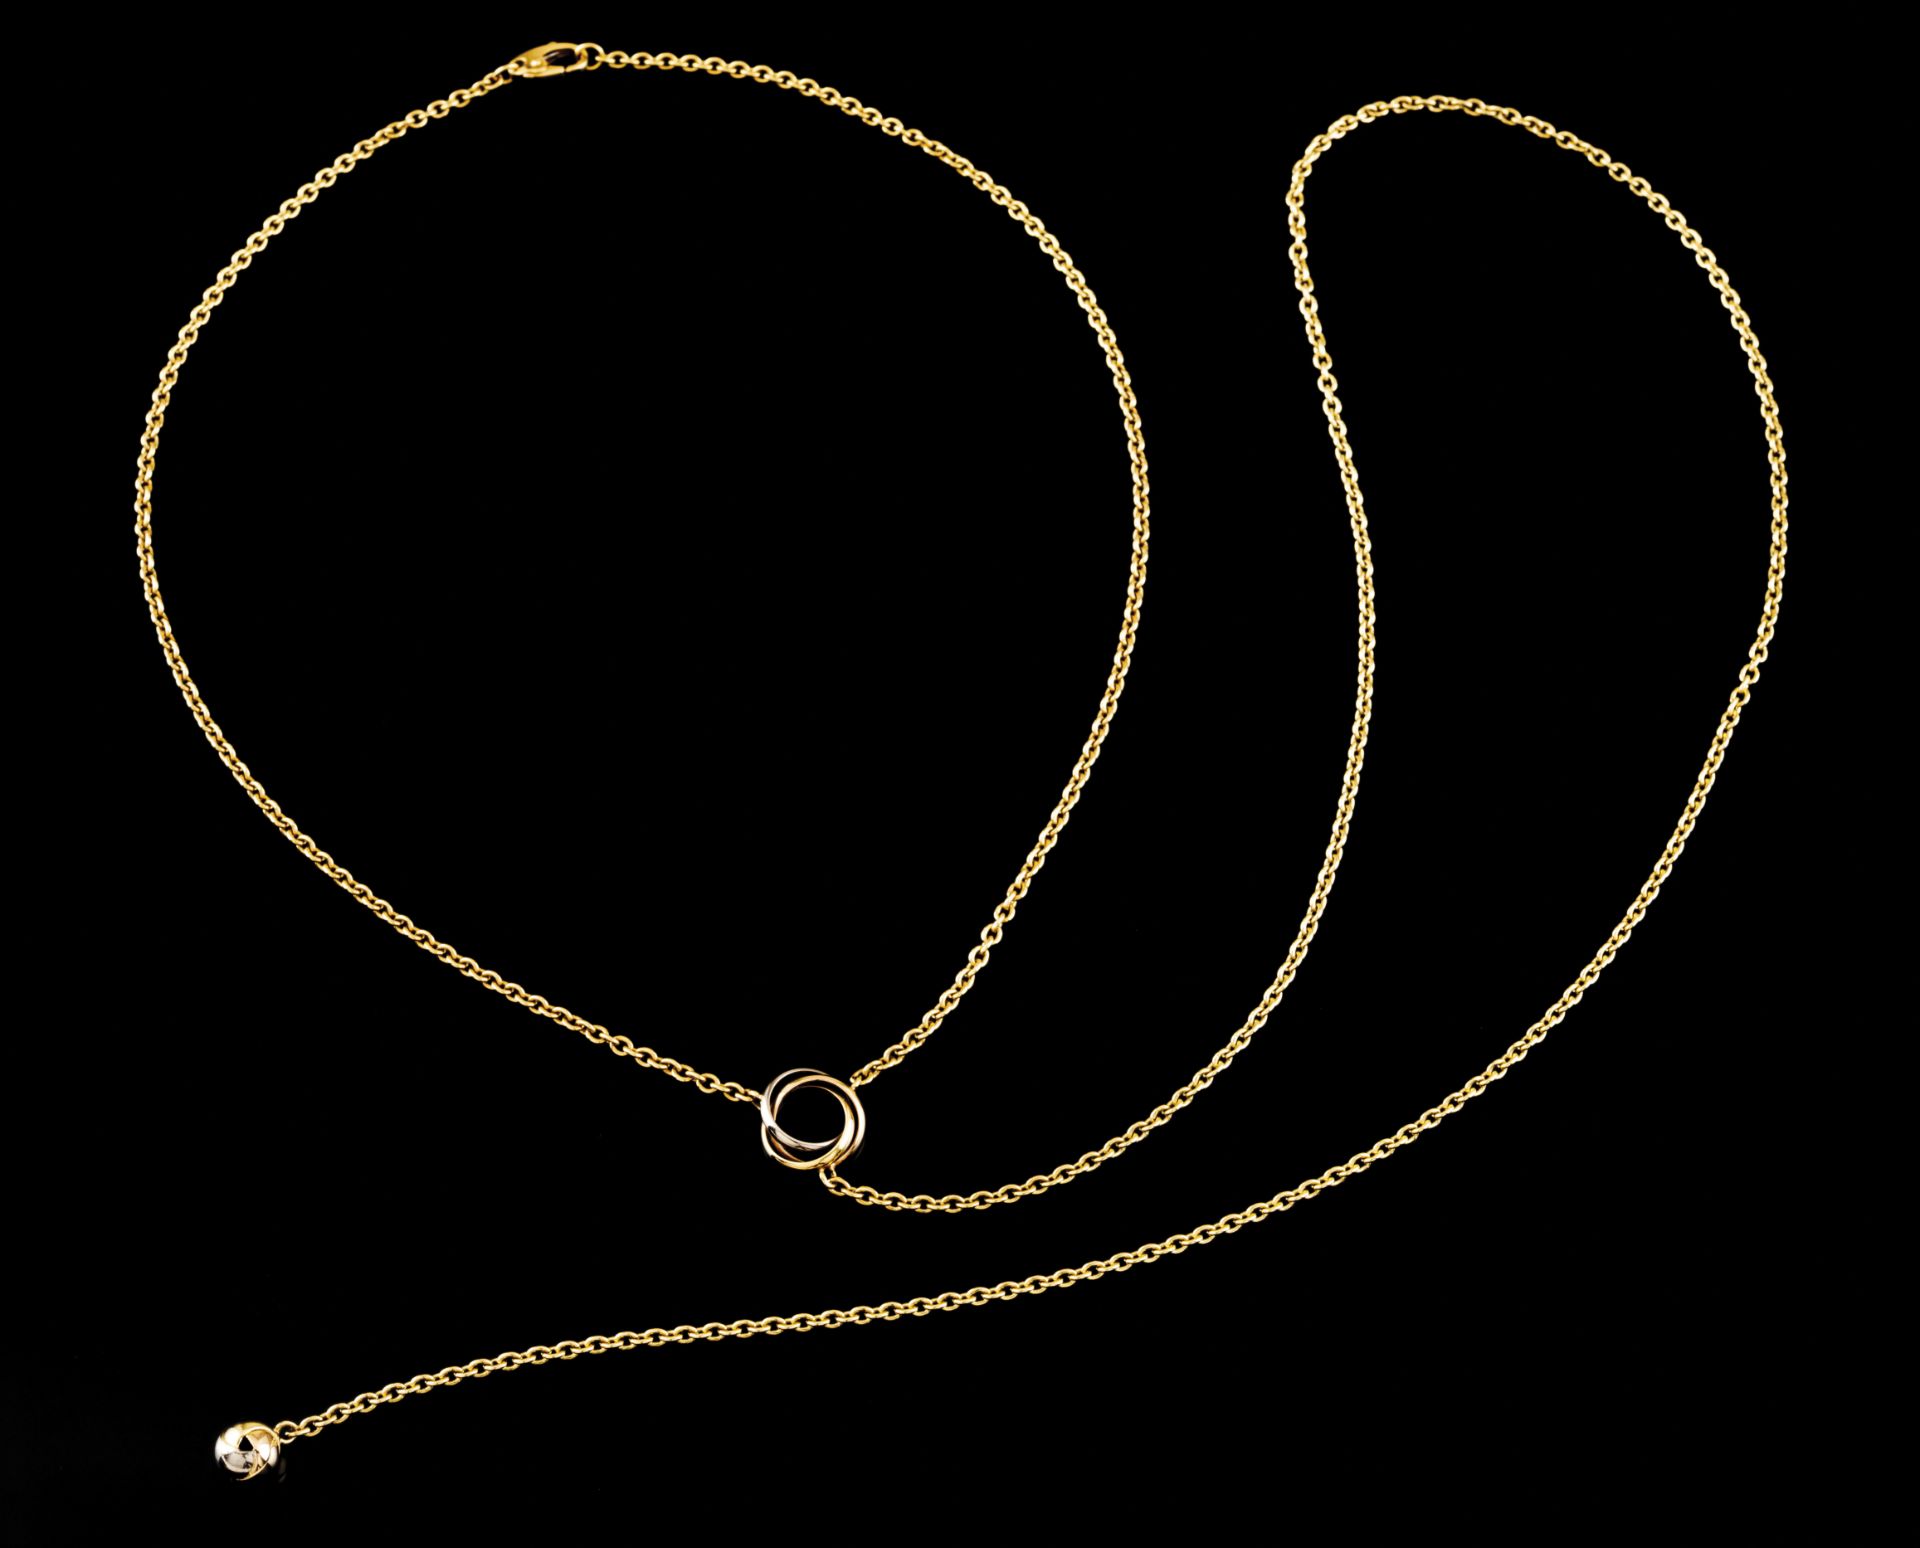 A Cartier necklaceGold mesh 750/1000Small tricoloured gold loop with sphere pendant terminal in